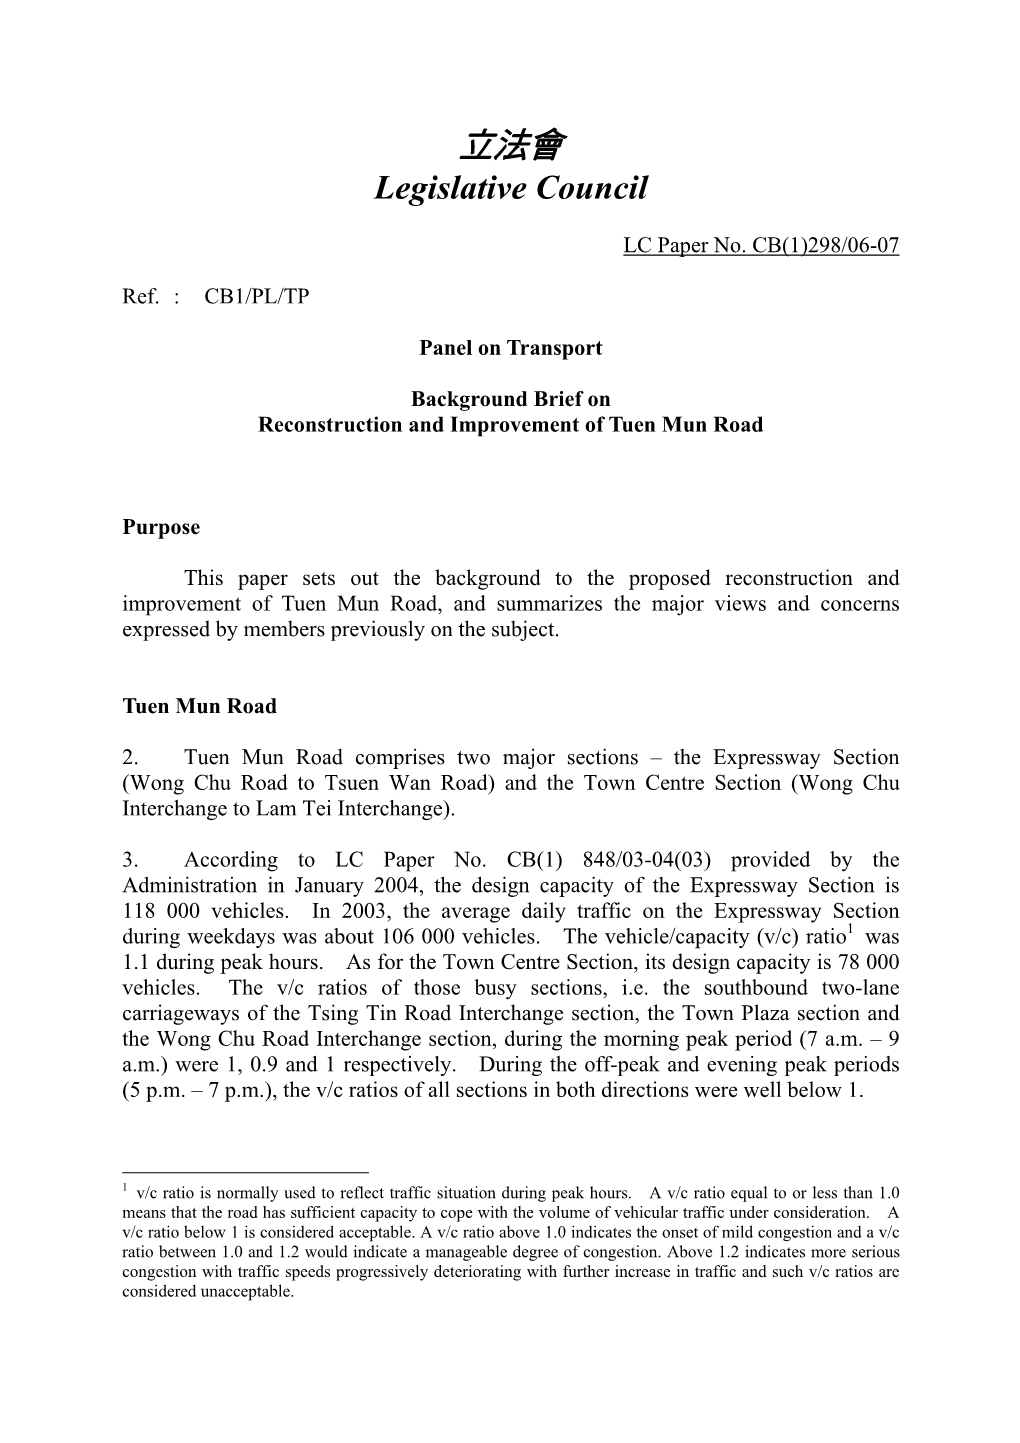 Background Brief on Reconstruction and Improvement of Tuen Mun Road